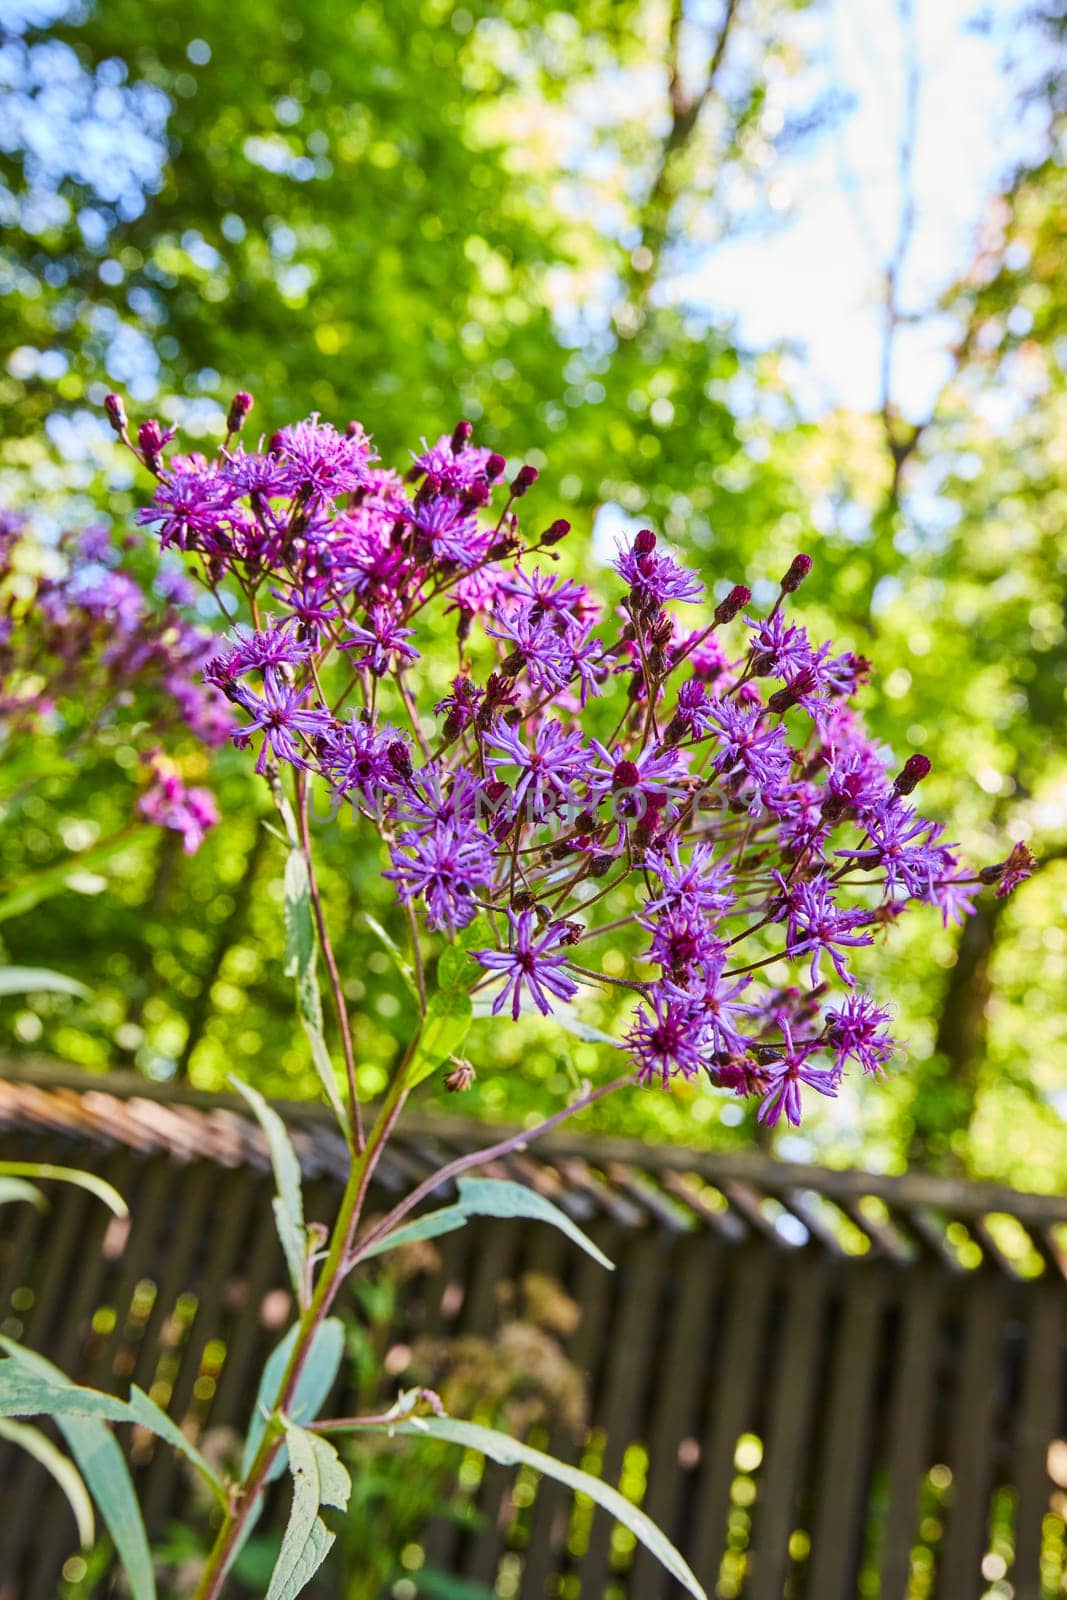 Purple Wildflowers in Lush Garden with Rustic Fence Background by njproductions